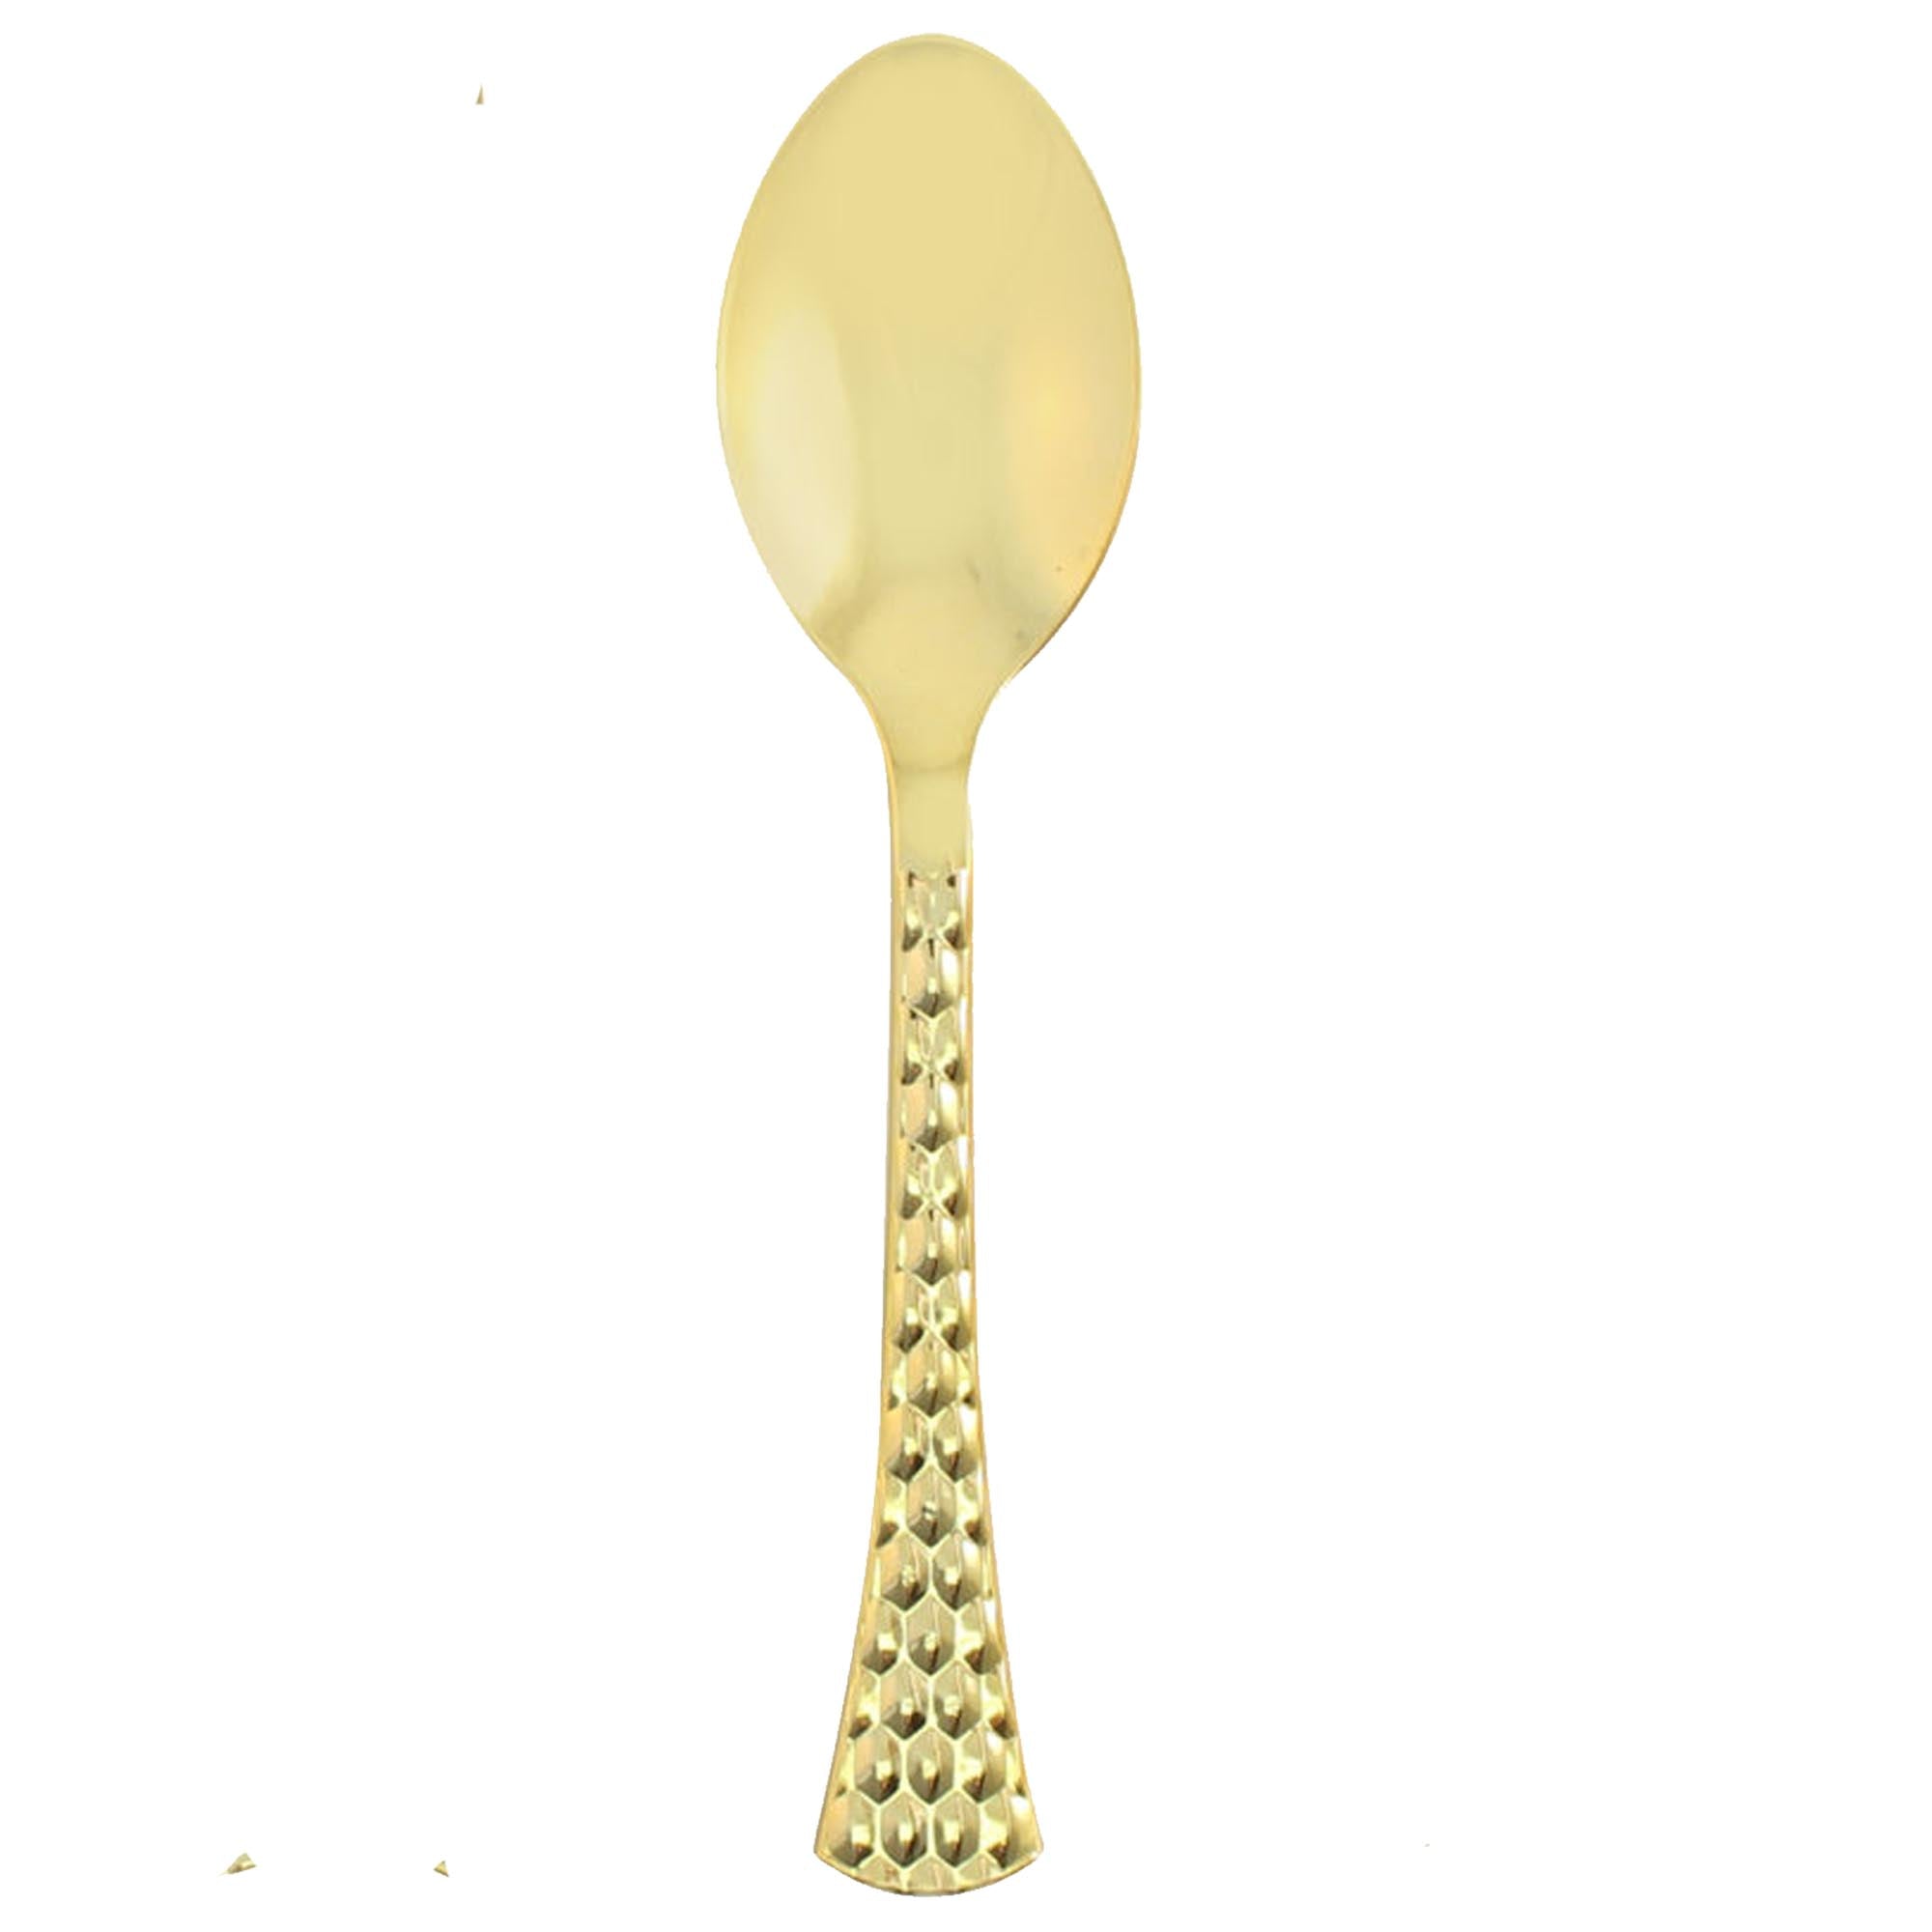 Fancy Disposable Gold Plastic Table Spoons Extra Heavyweight Glamour Collection